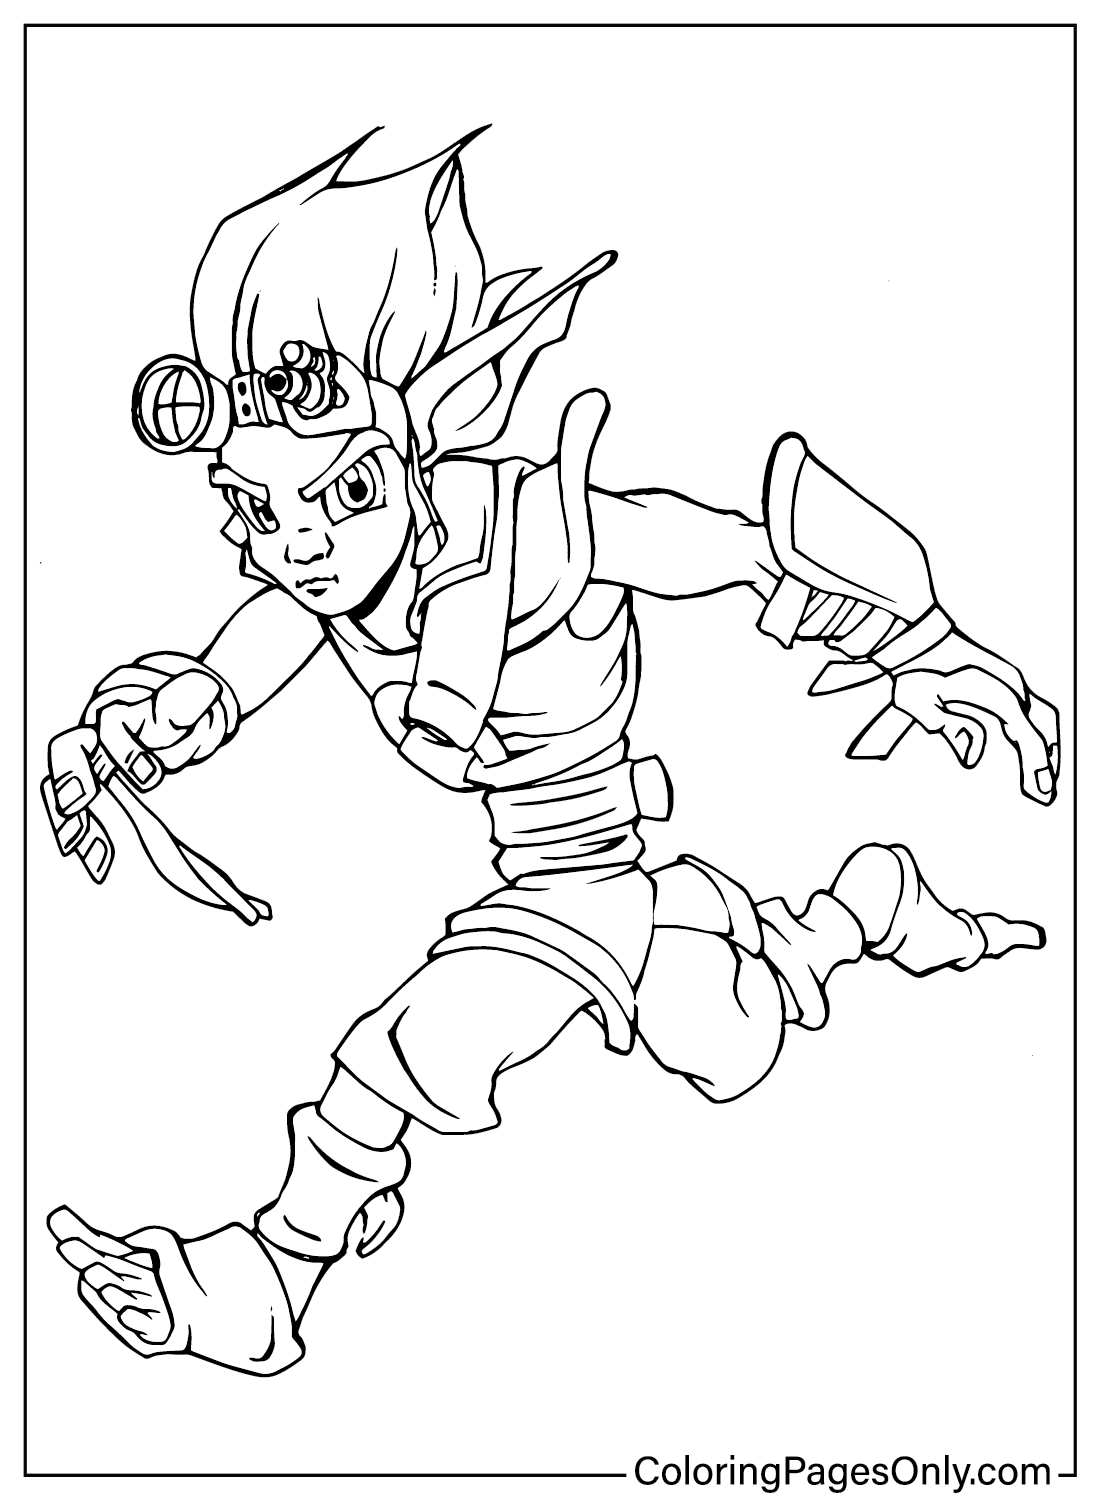 Jak and Daxter Coloring Page from Jak and Daxter